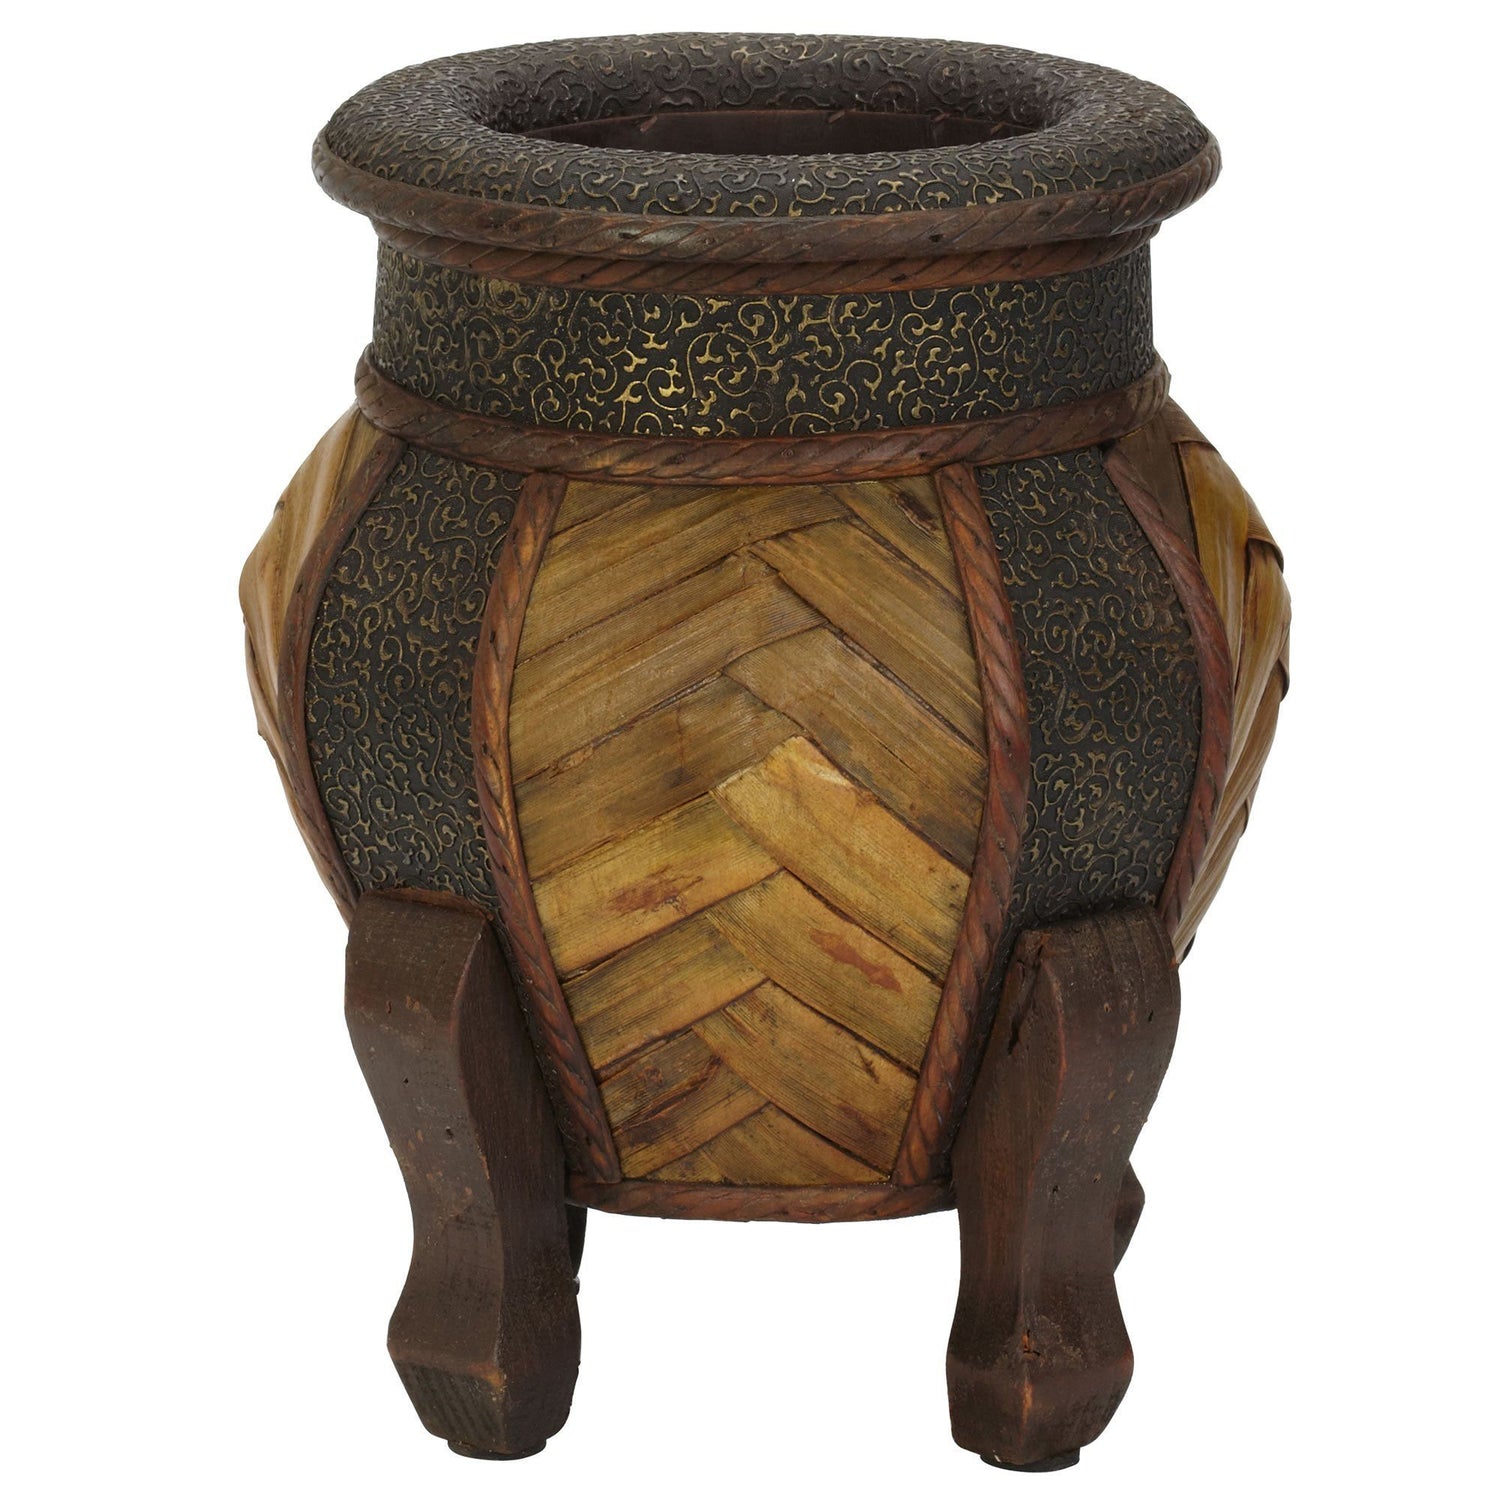 Decorative Rounded Wood Planters (Set of 2)